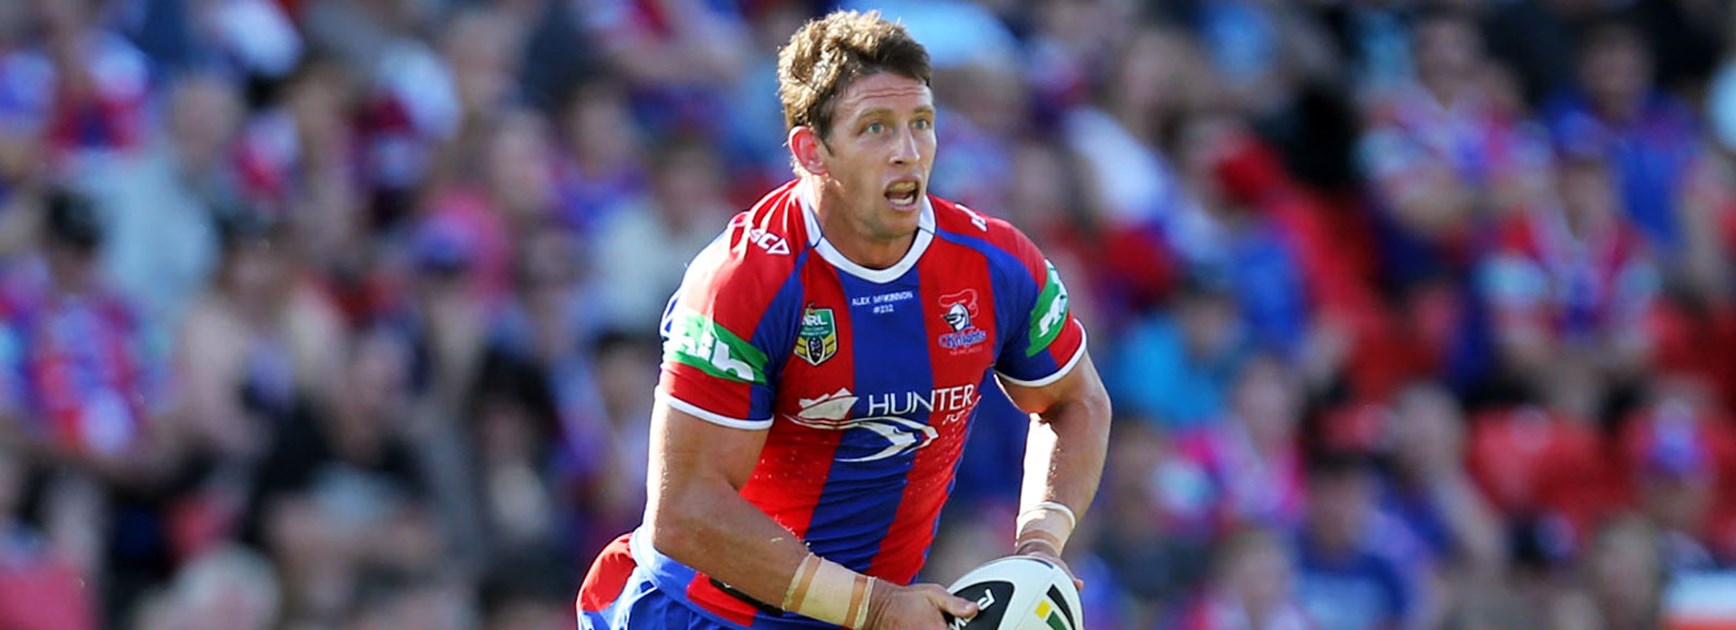 Knights captain Kurt Gidley is expected to return from injury this week.